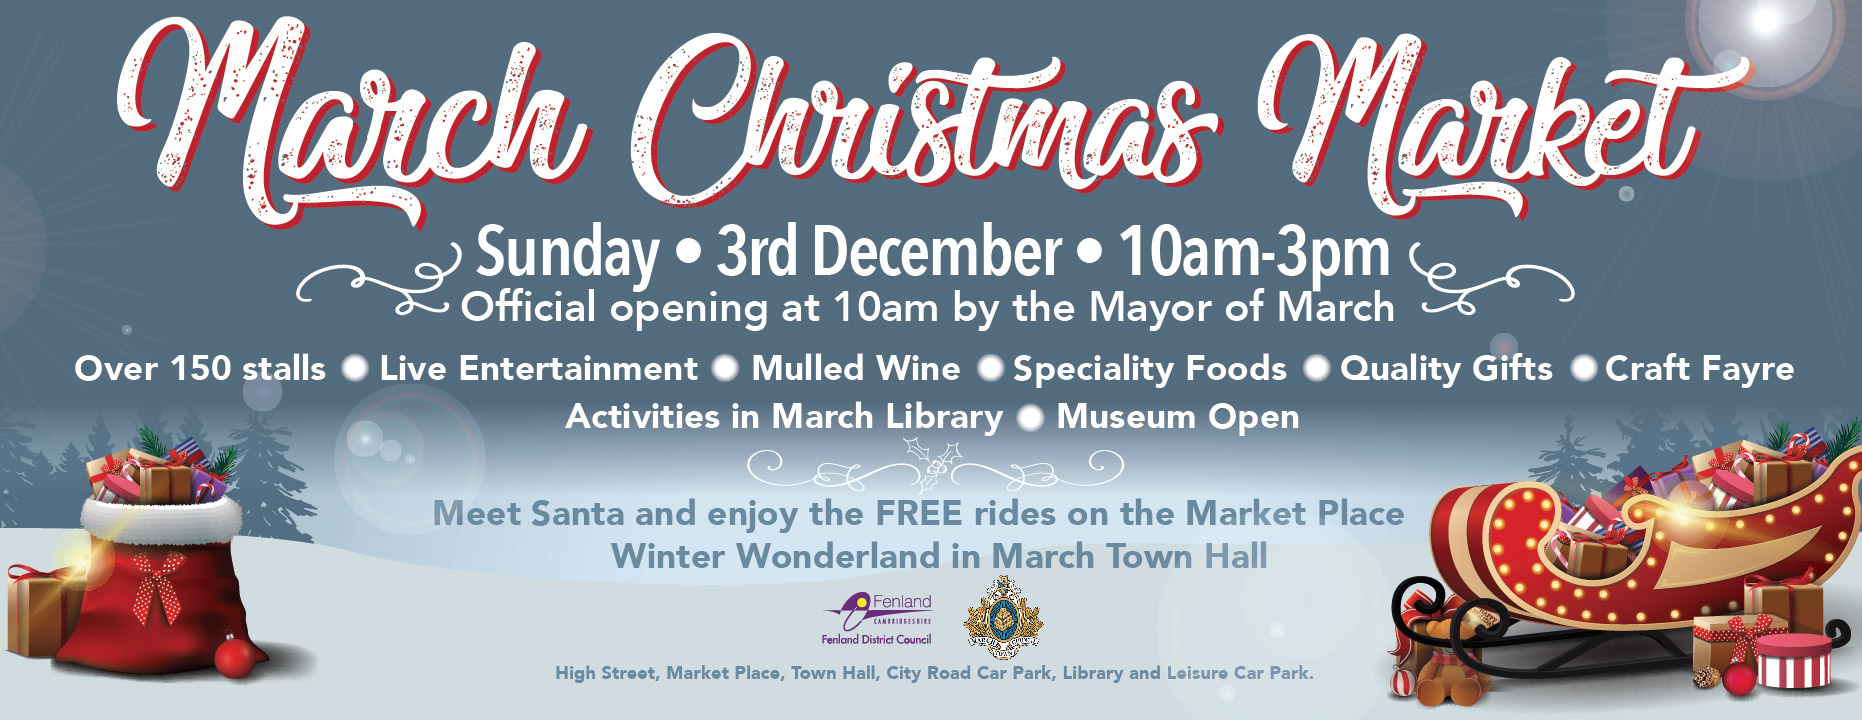 Graphic for March Christmas Market - Sunday 3rd December, 10am to 3pm